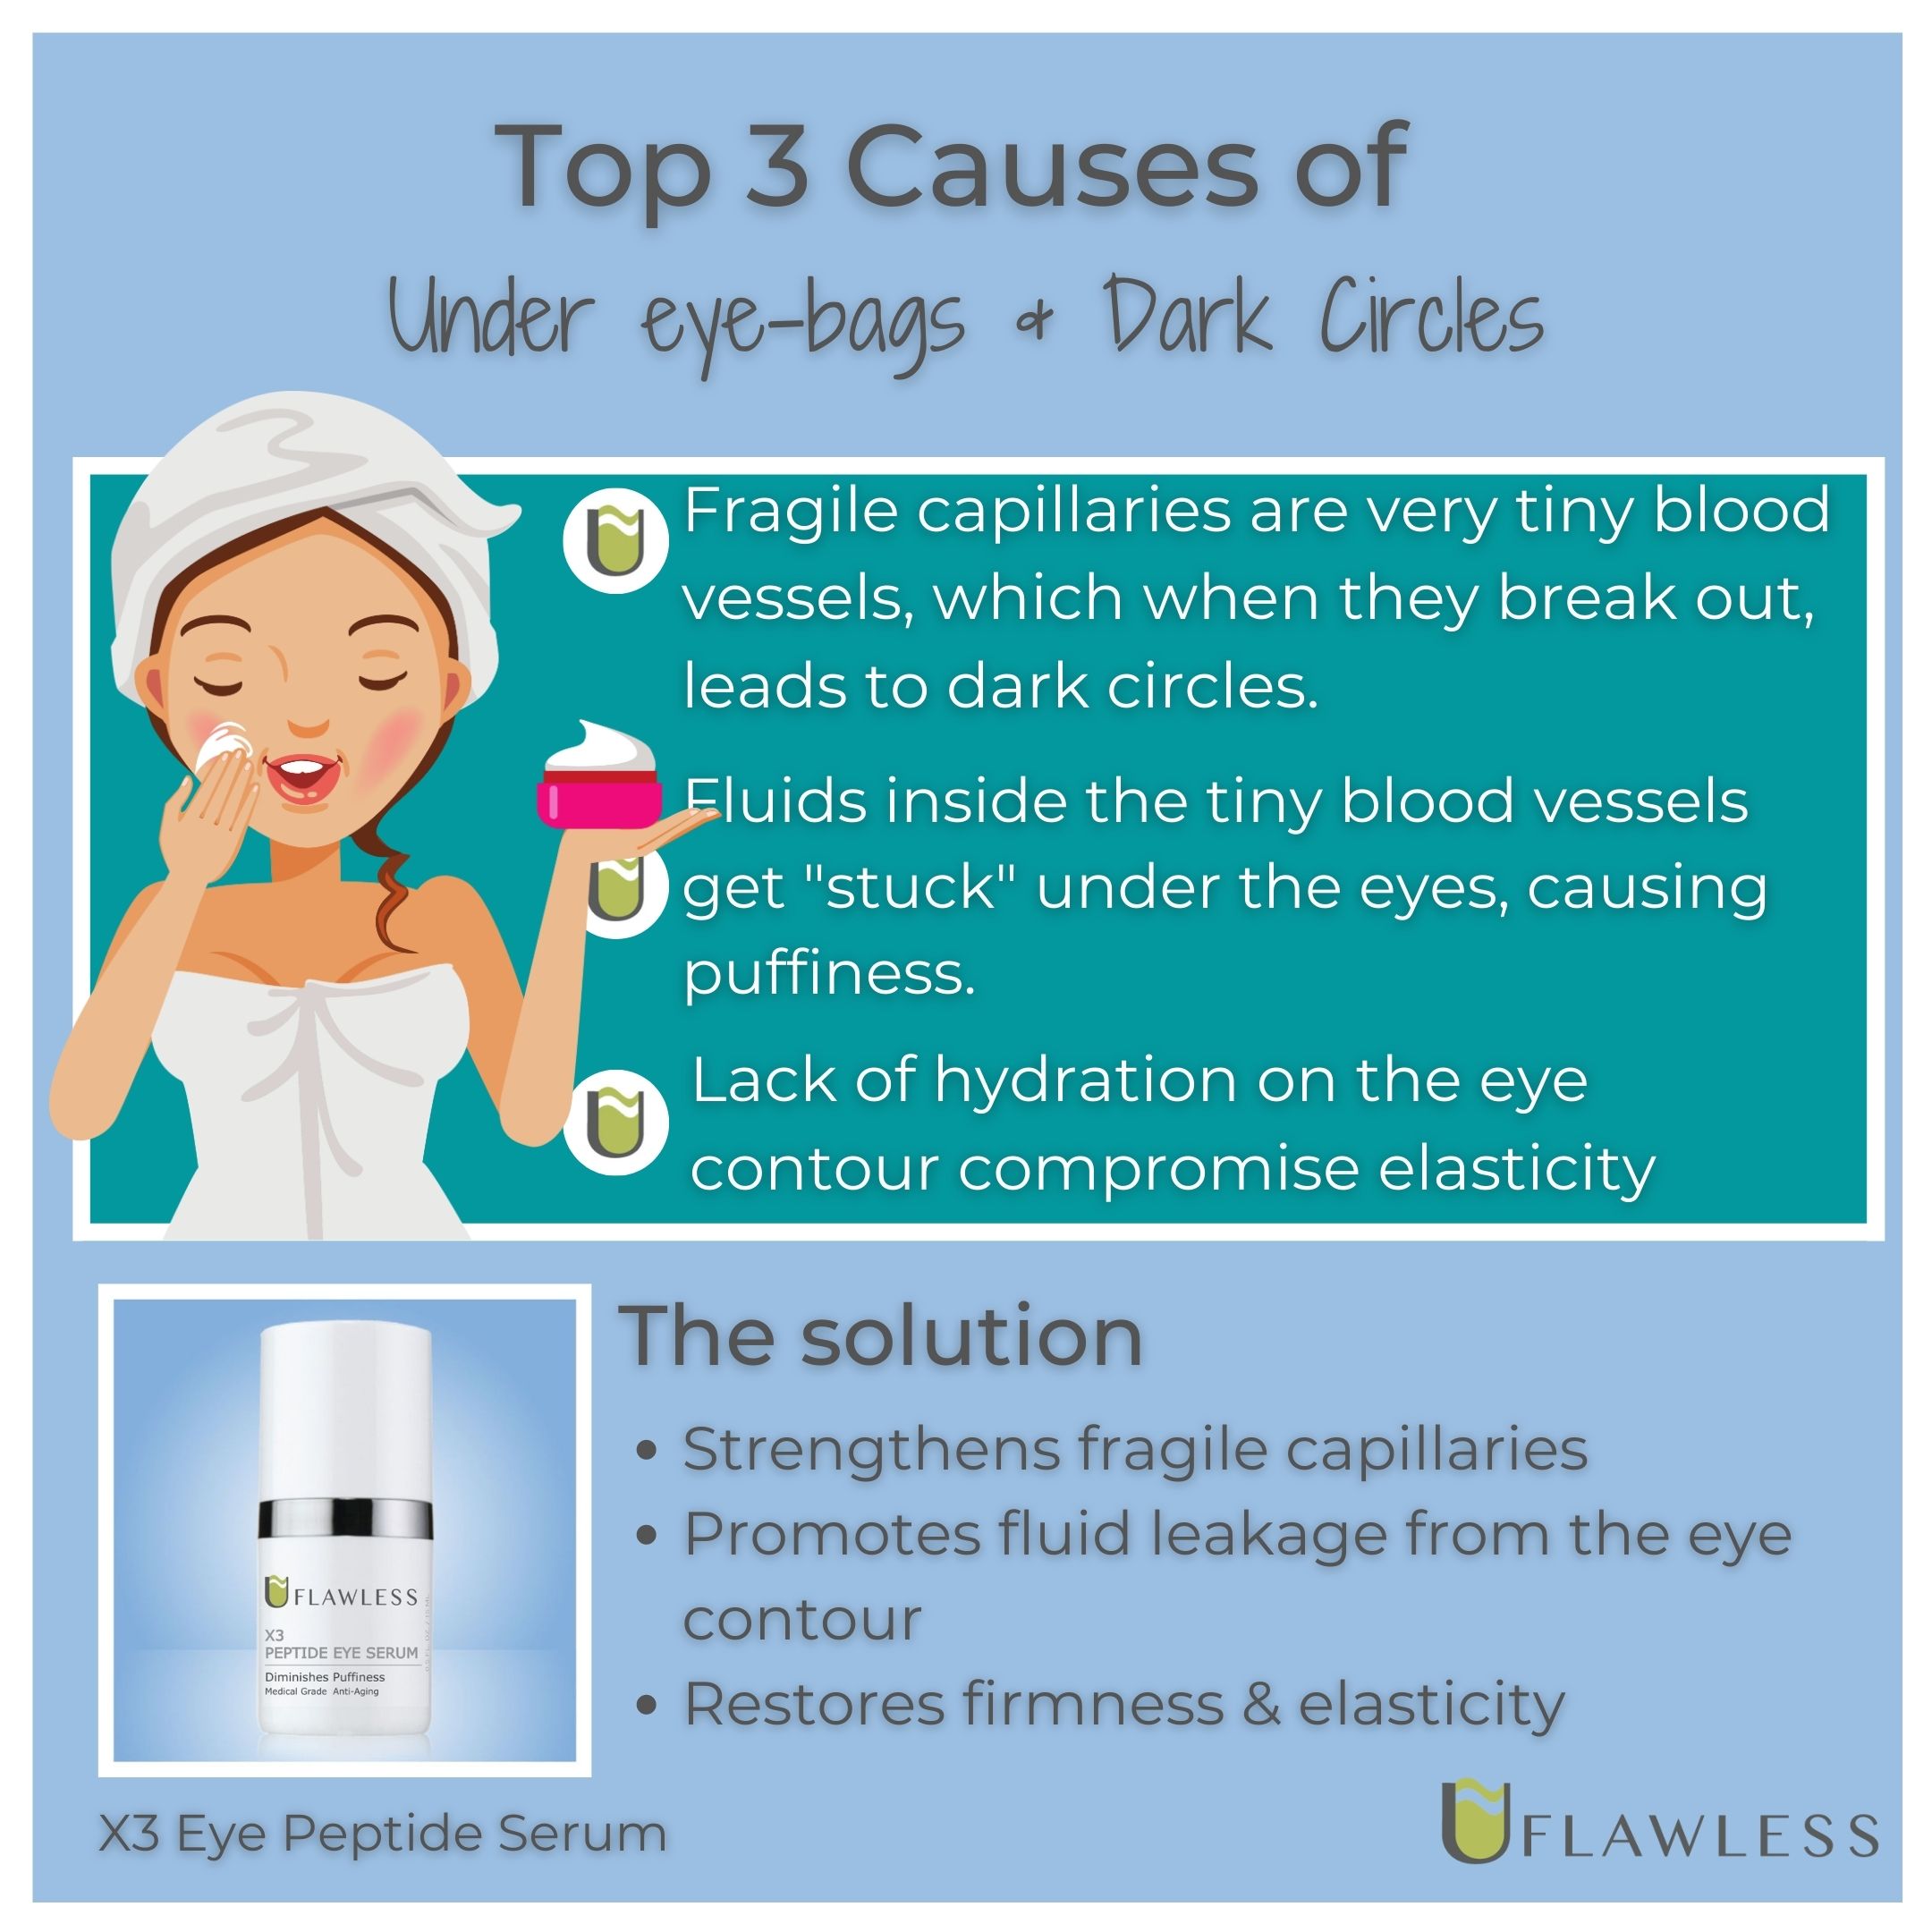 Causes of under eye bags and dark circles